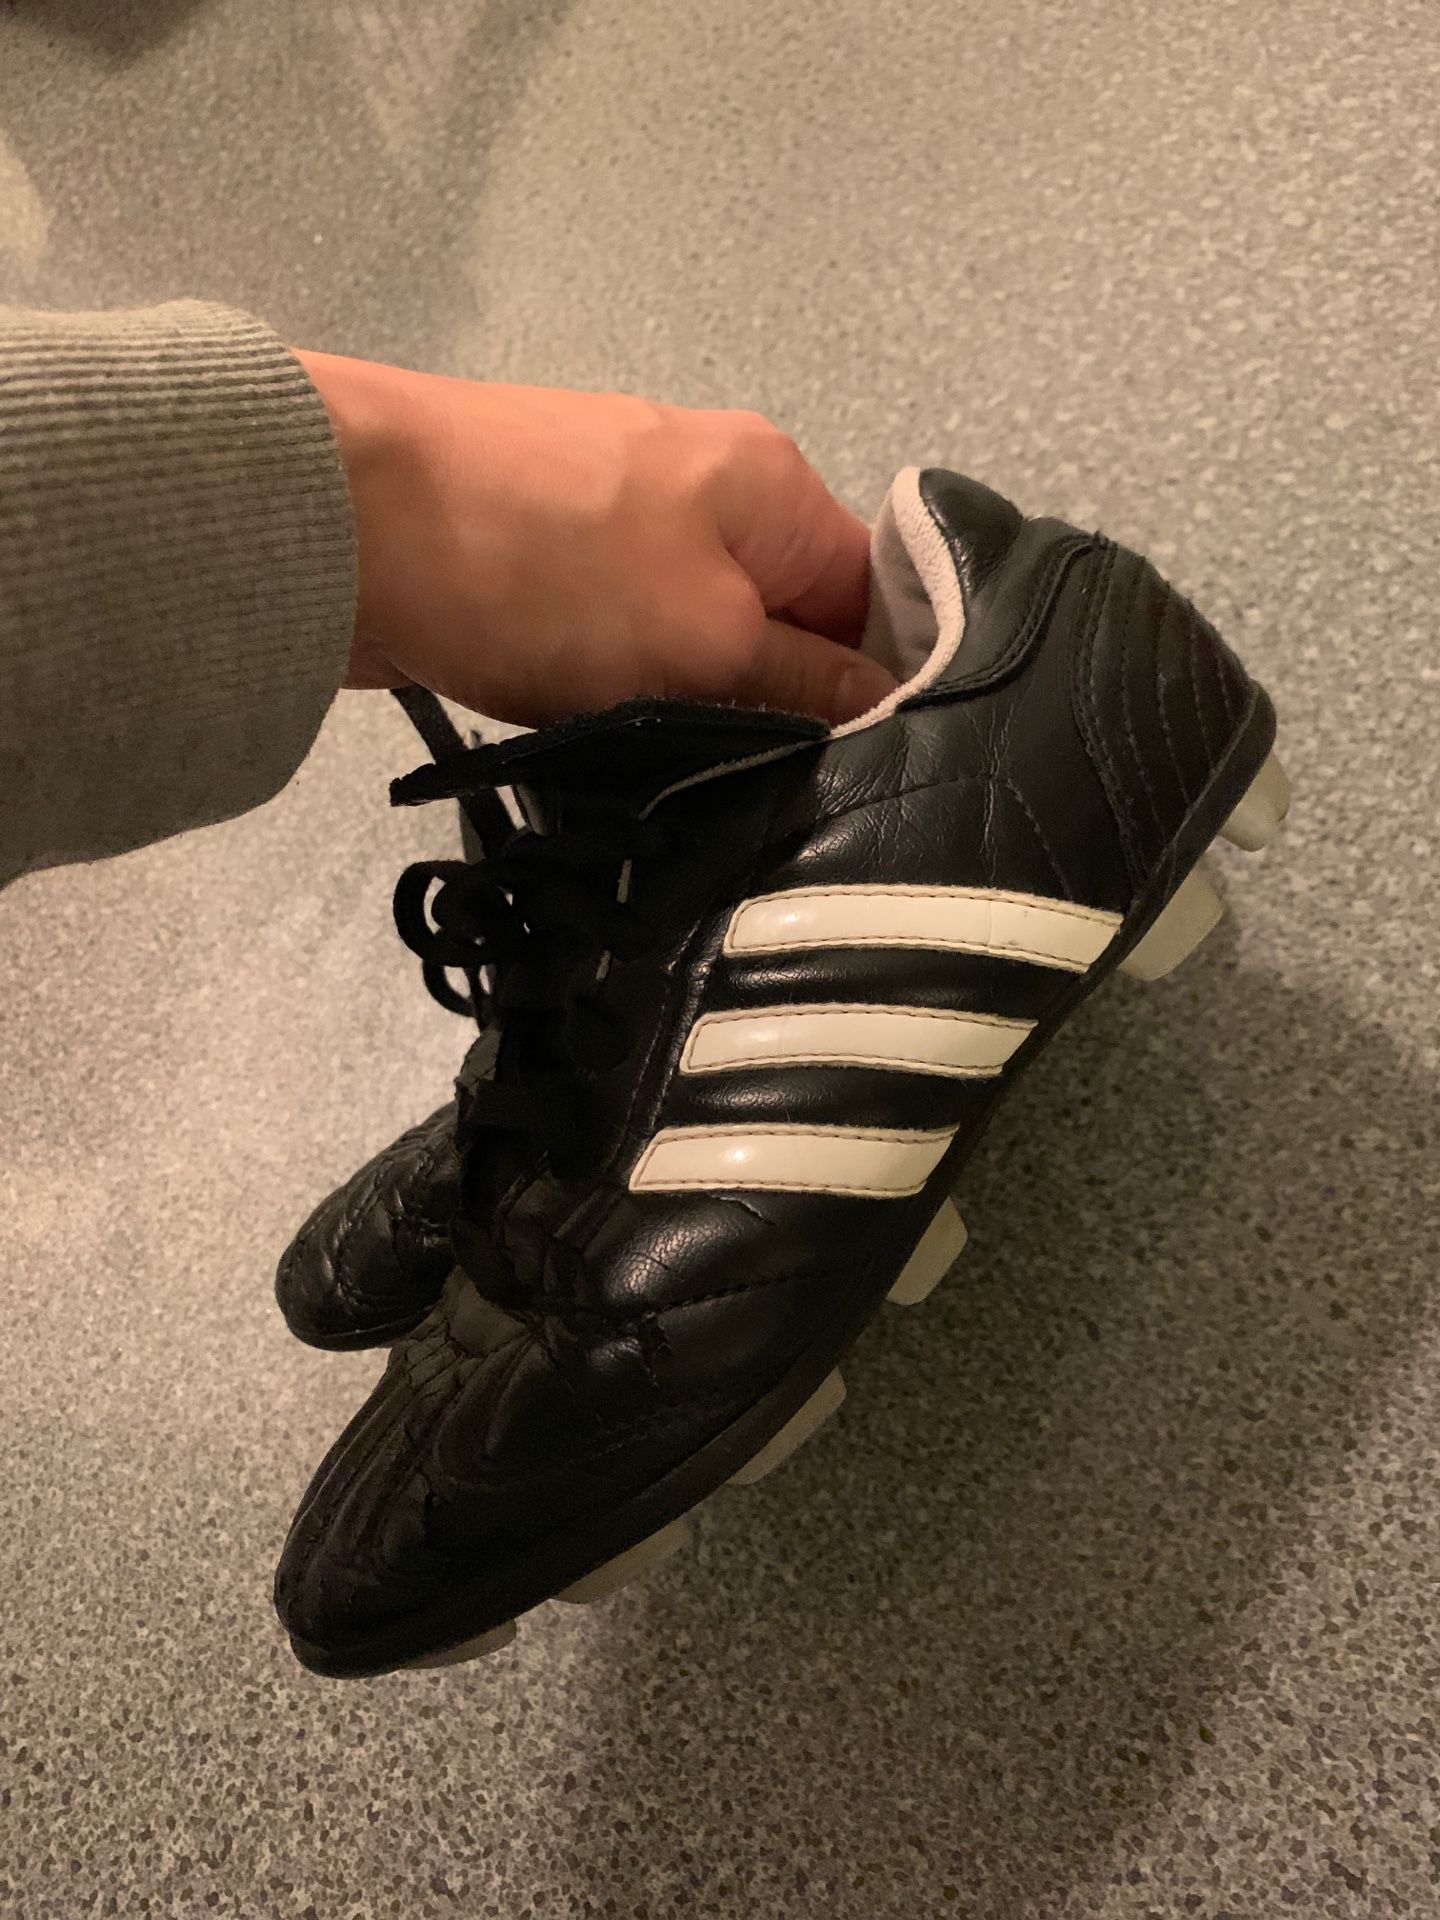 Adidas kids soccer cleats size 1 youth